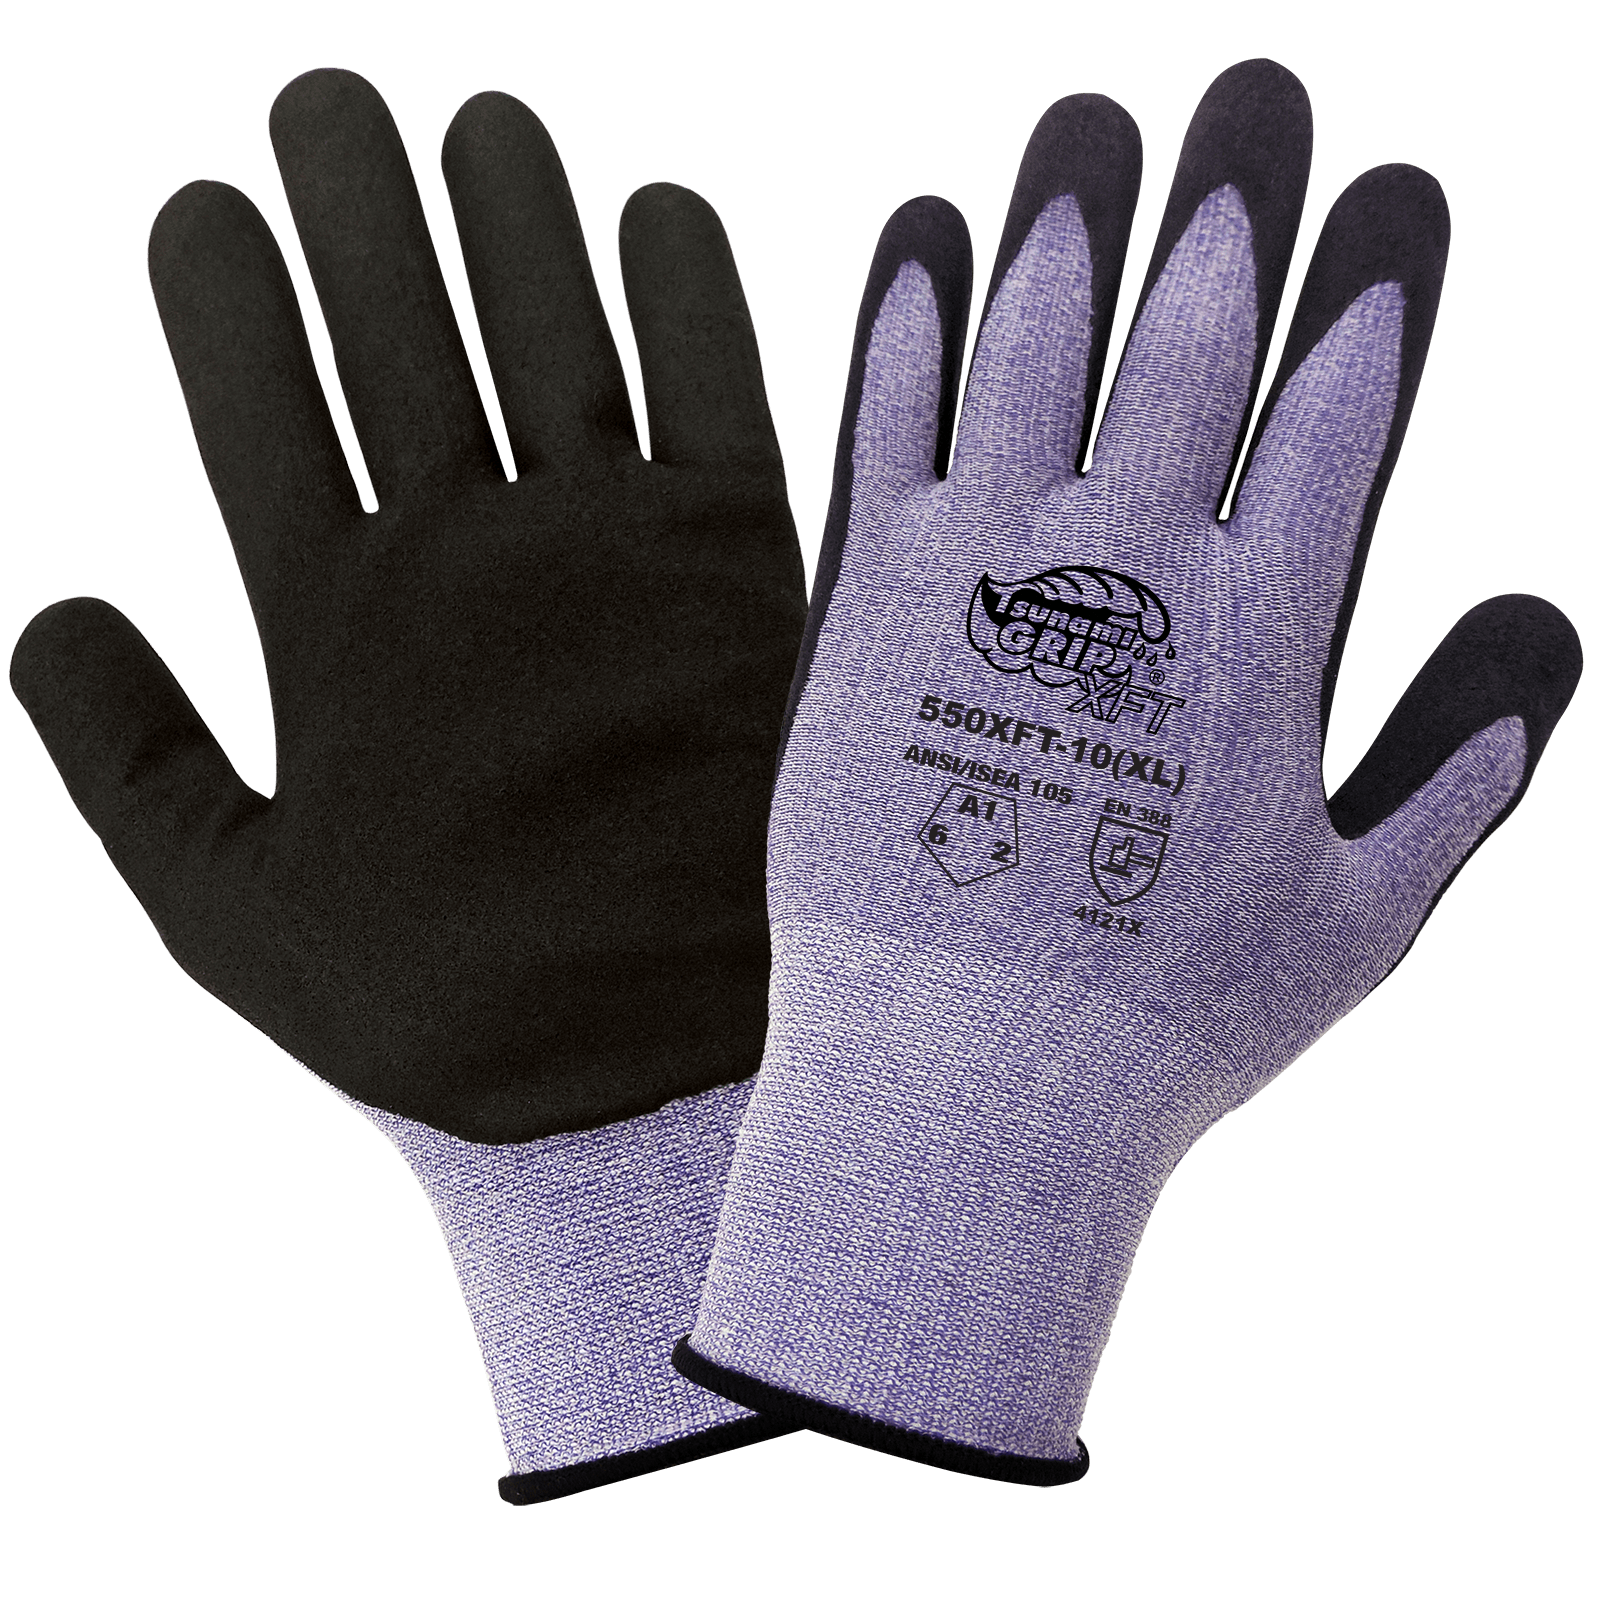 Tsunami Grip® XFT Xtreme Foam Technology Coated Anti-Static/Electrostatic Compliant Gloves with Cut, Abrasion, and Puncture Resistance, M